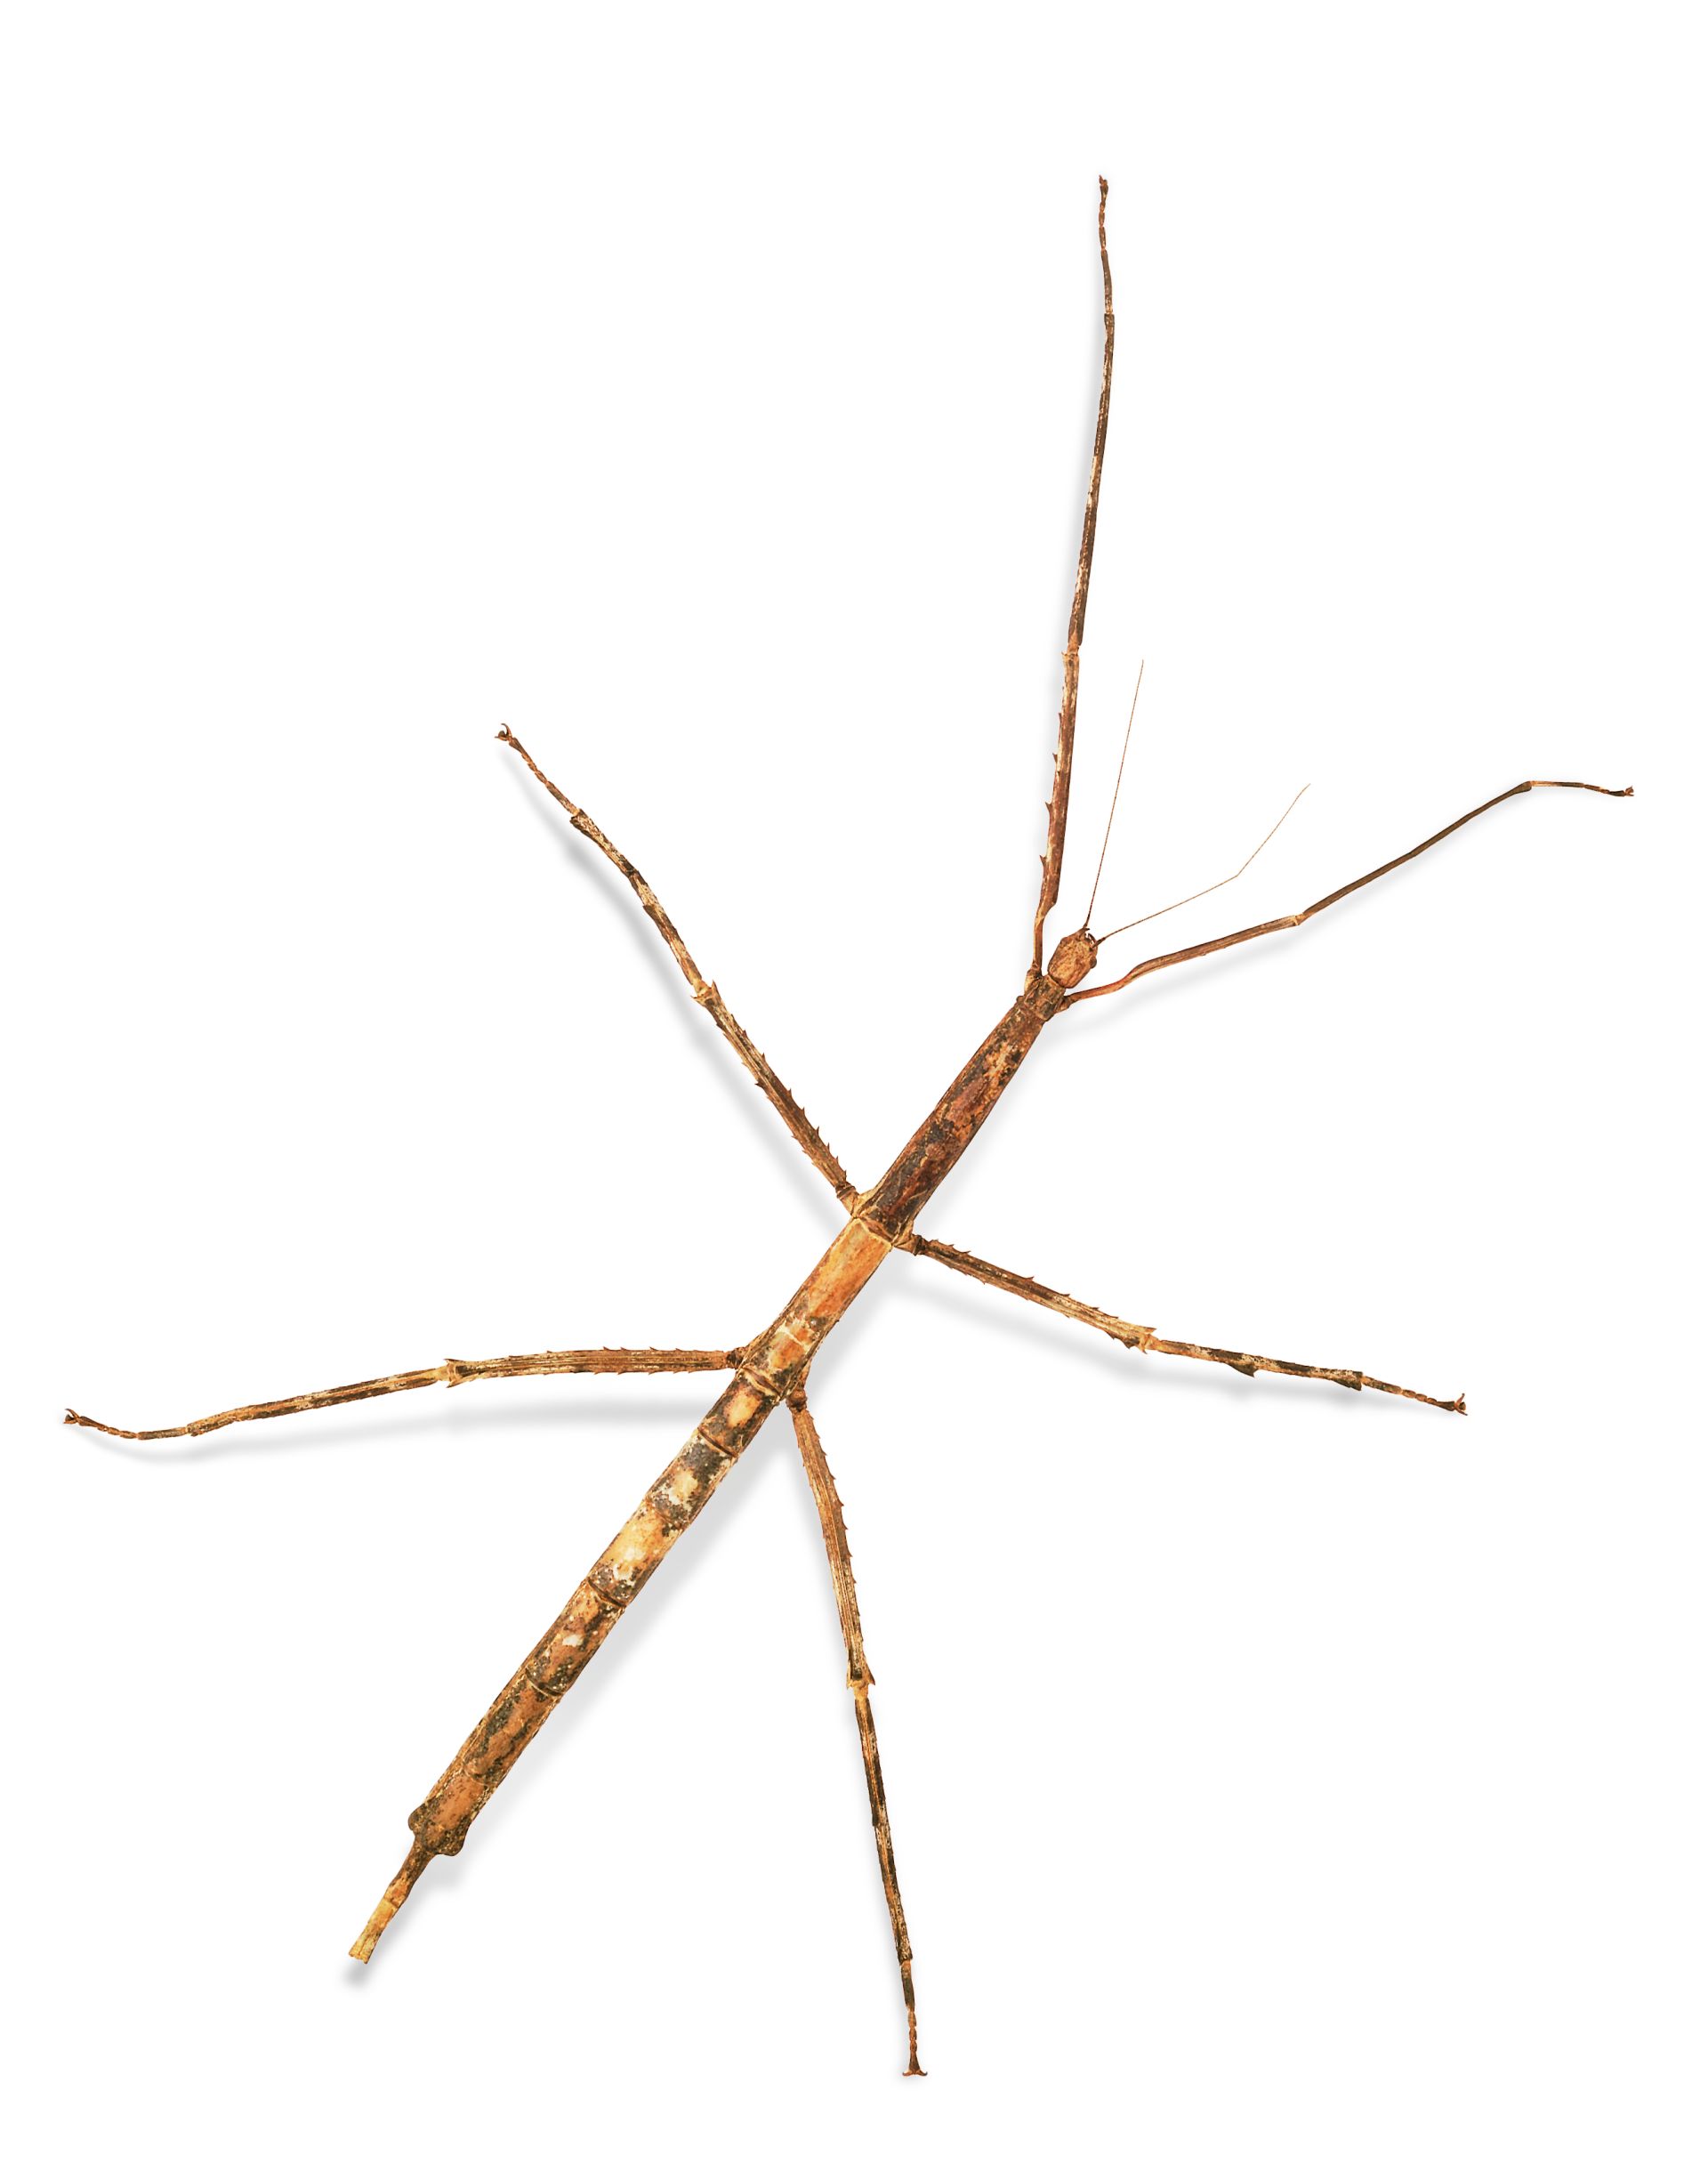 Stick insect photo